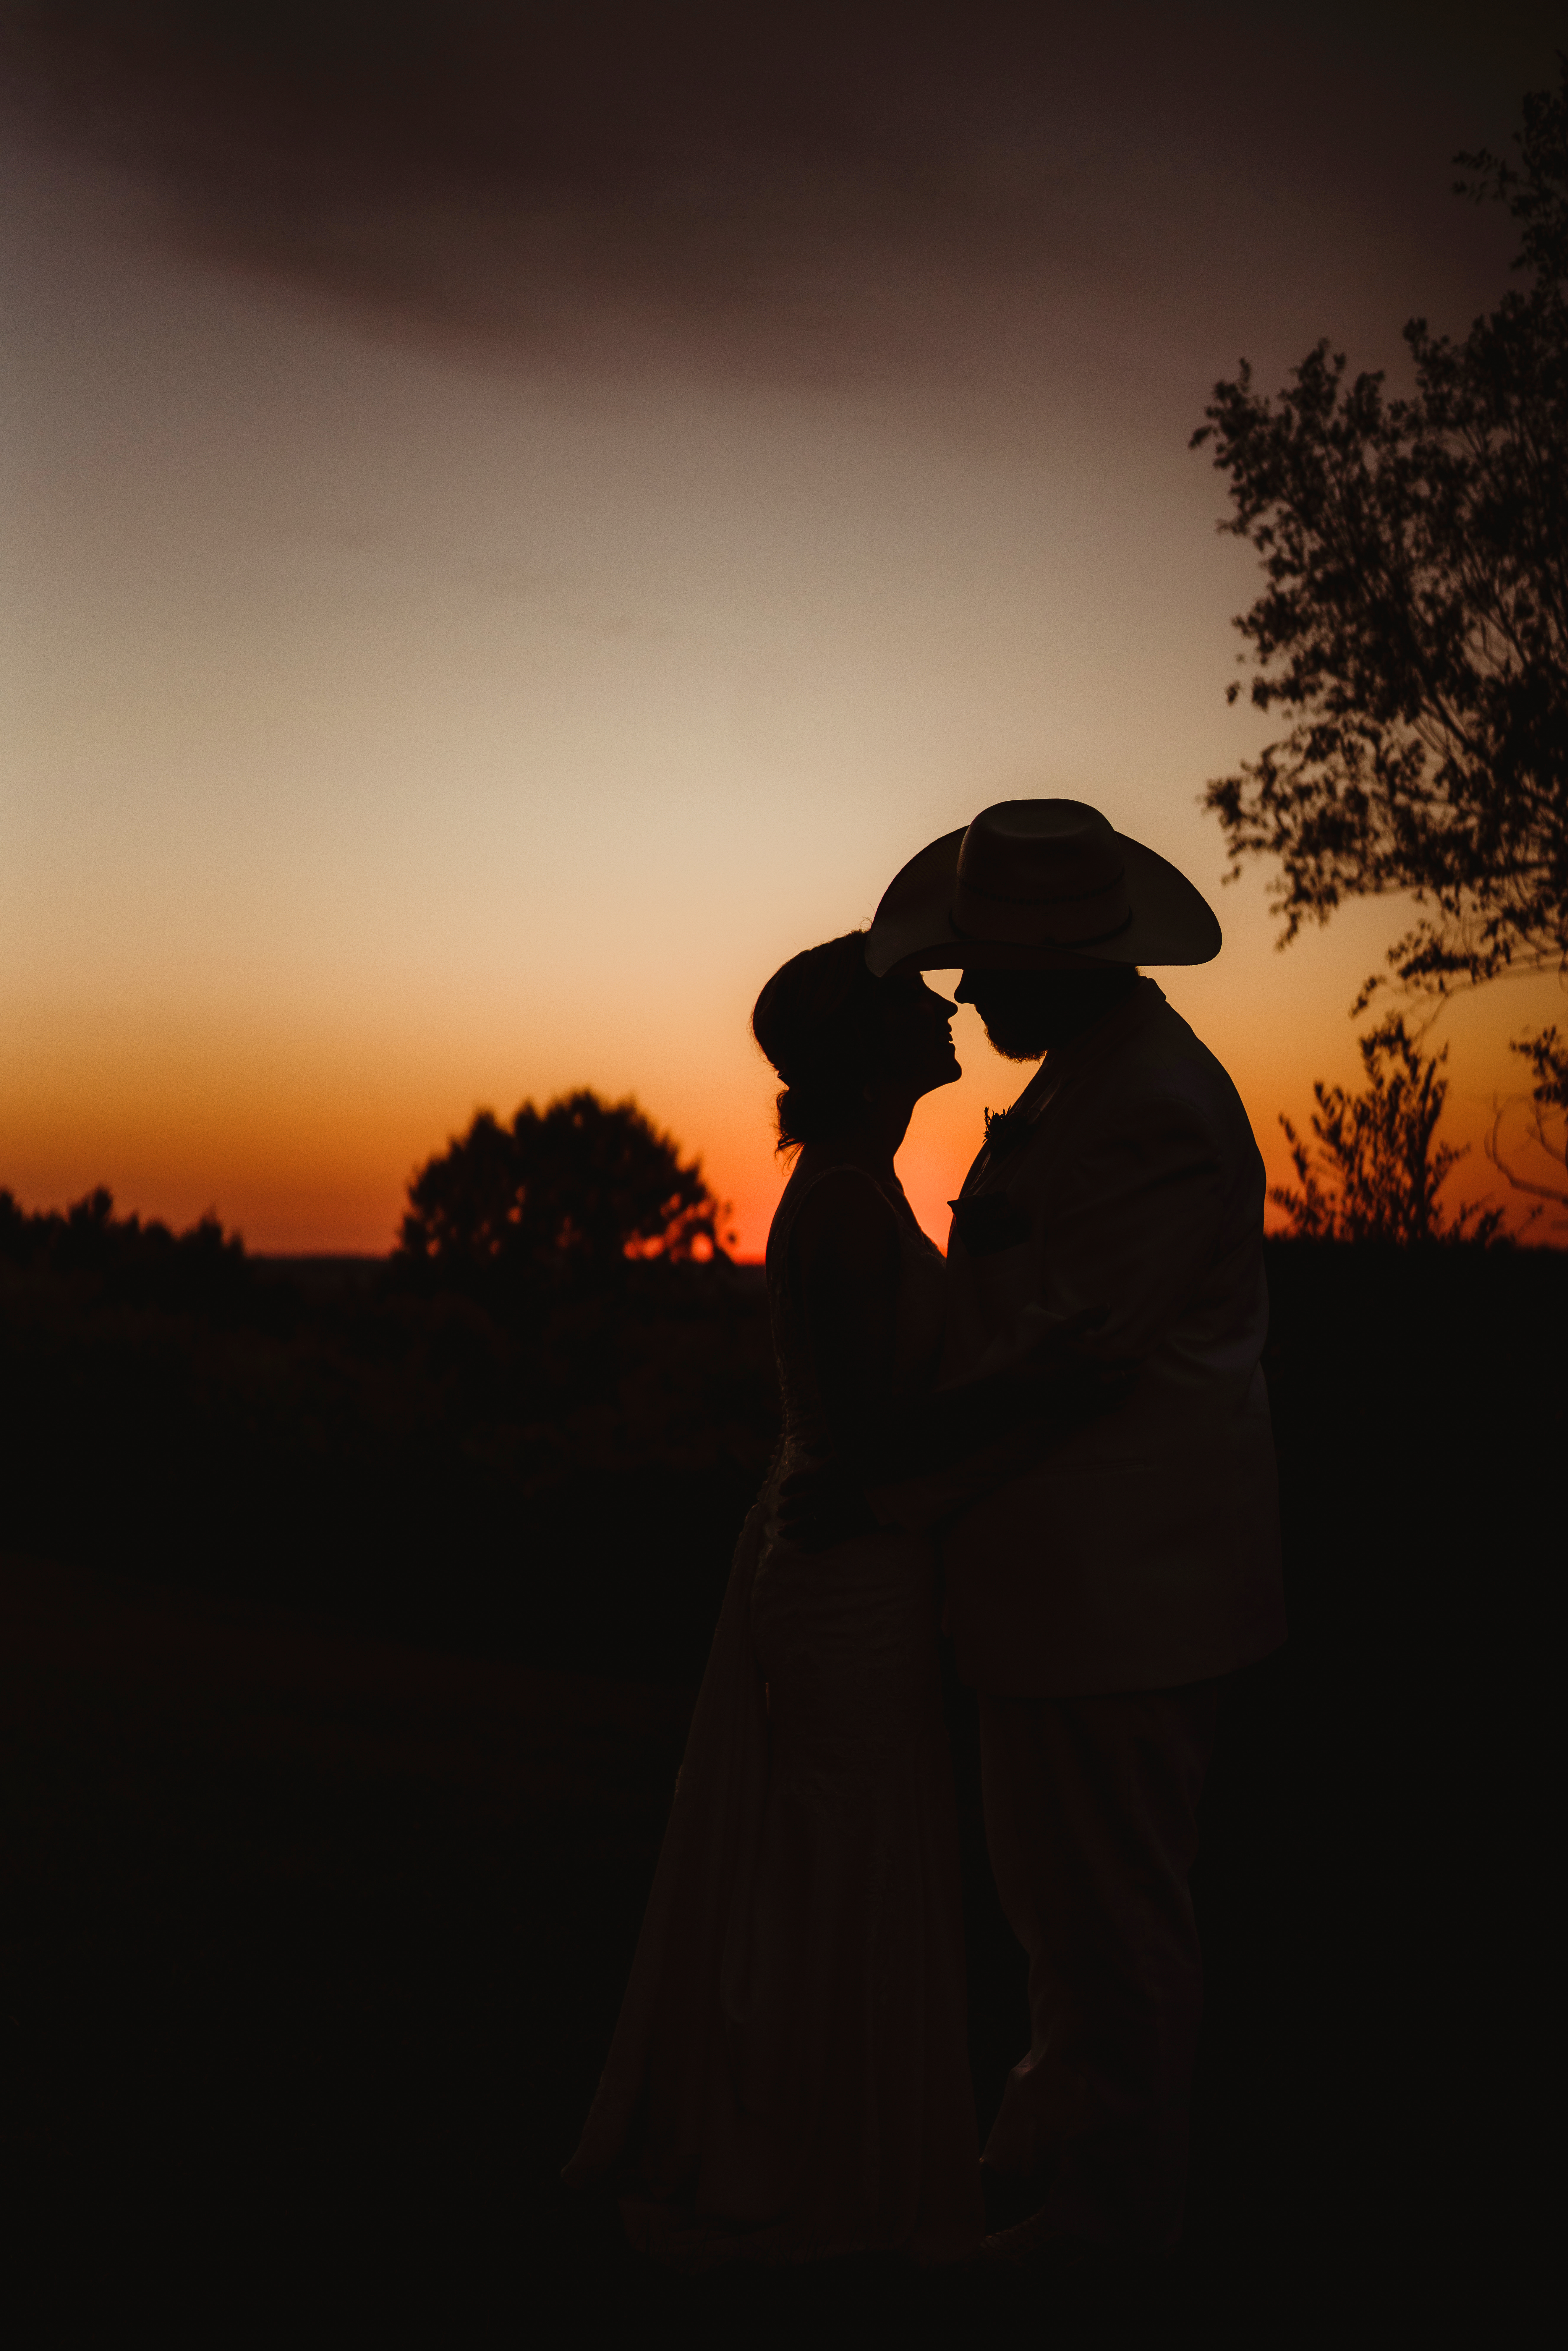 This gorgeous sunset silhouette photo was taken of the bride and groom at the end of their wedding day. Sunset bridals Bride and groom silhouette Romantic wedding photos #weddingplanning #weddingtimeline #diywedding #wisconsinweddingphotographer 